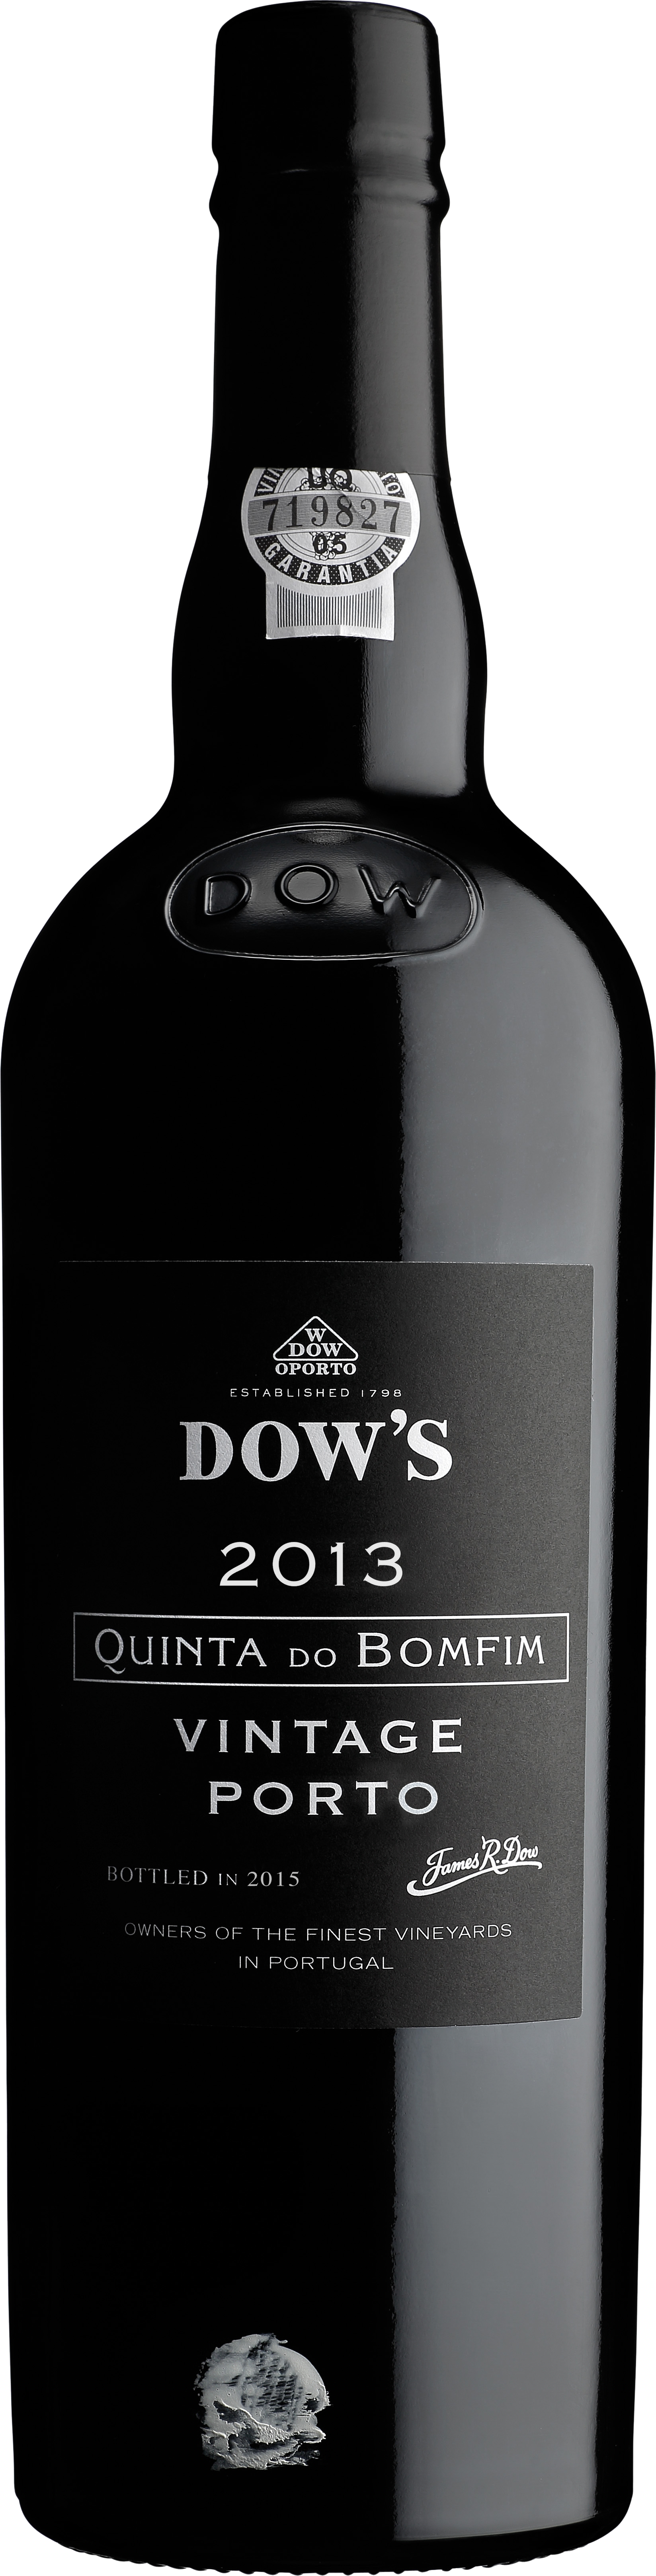 Vintage and Fine Wines - Dow's